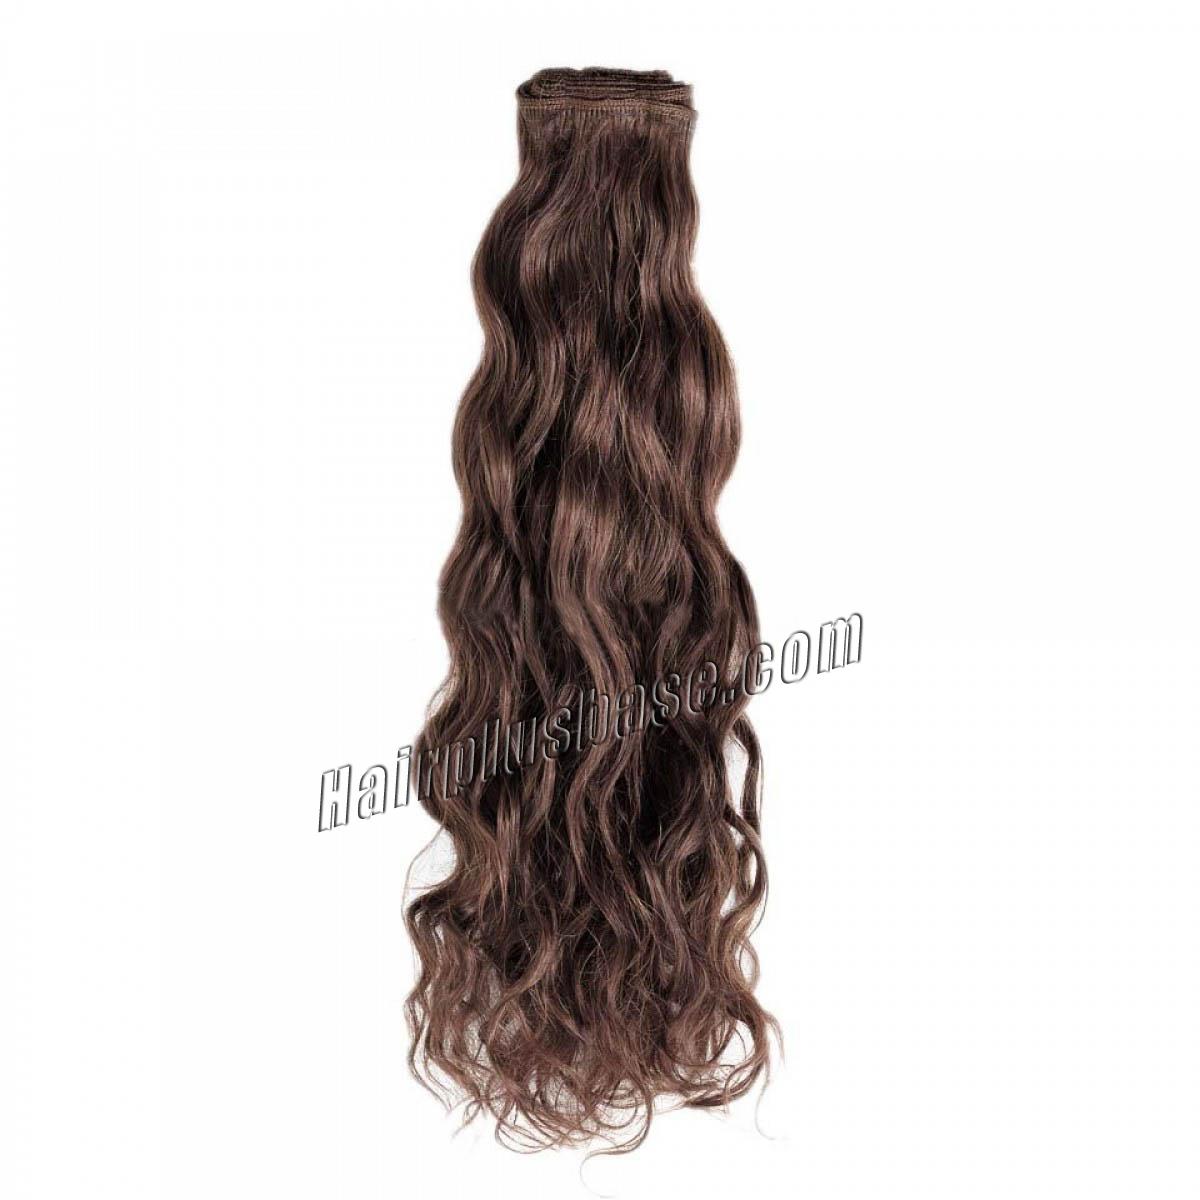 30 Inch 6 Light Brown Curly Indian Remy Hair Wefts 